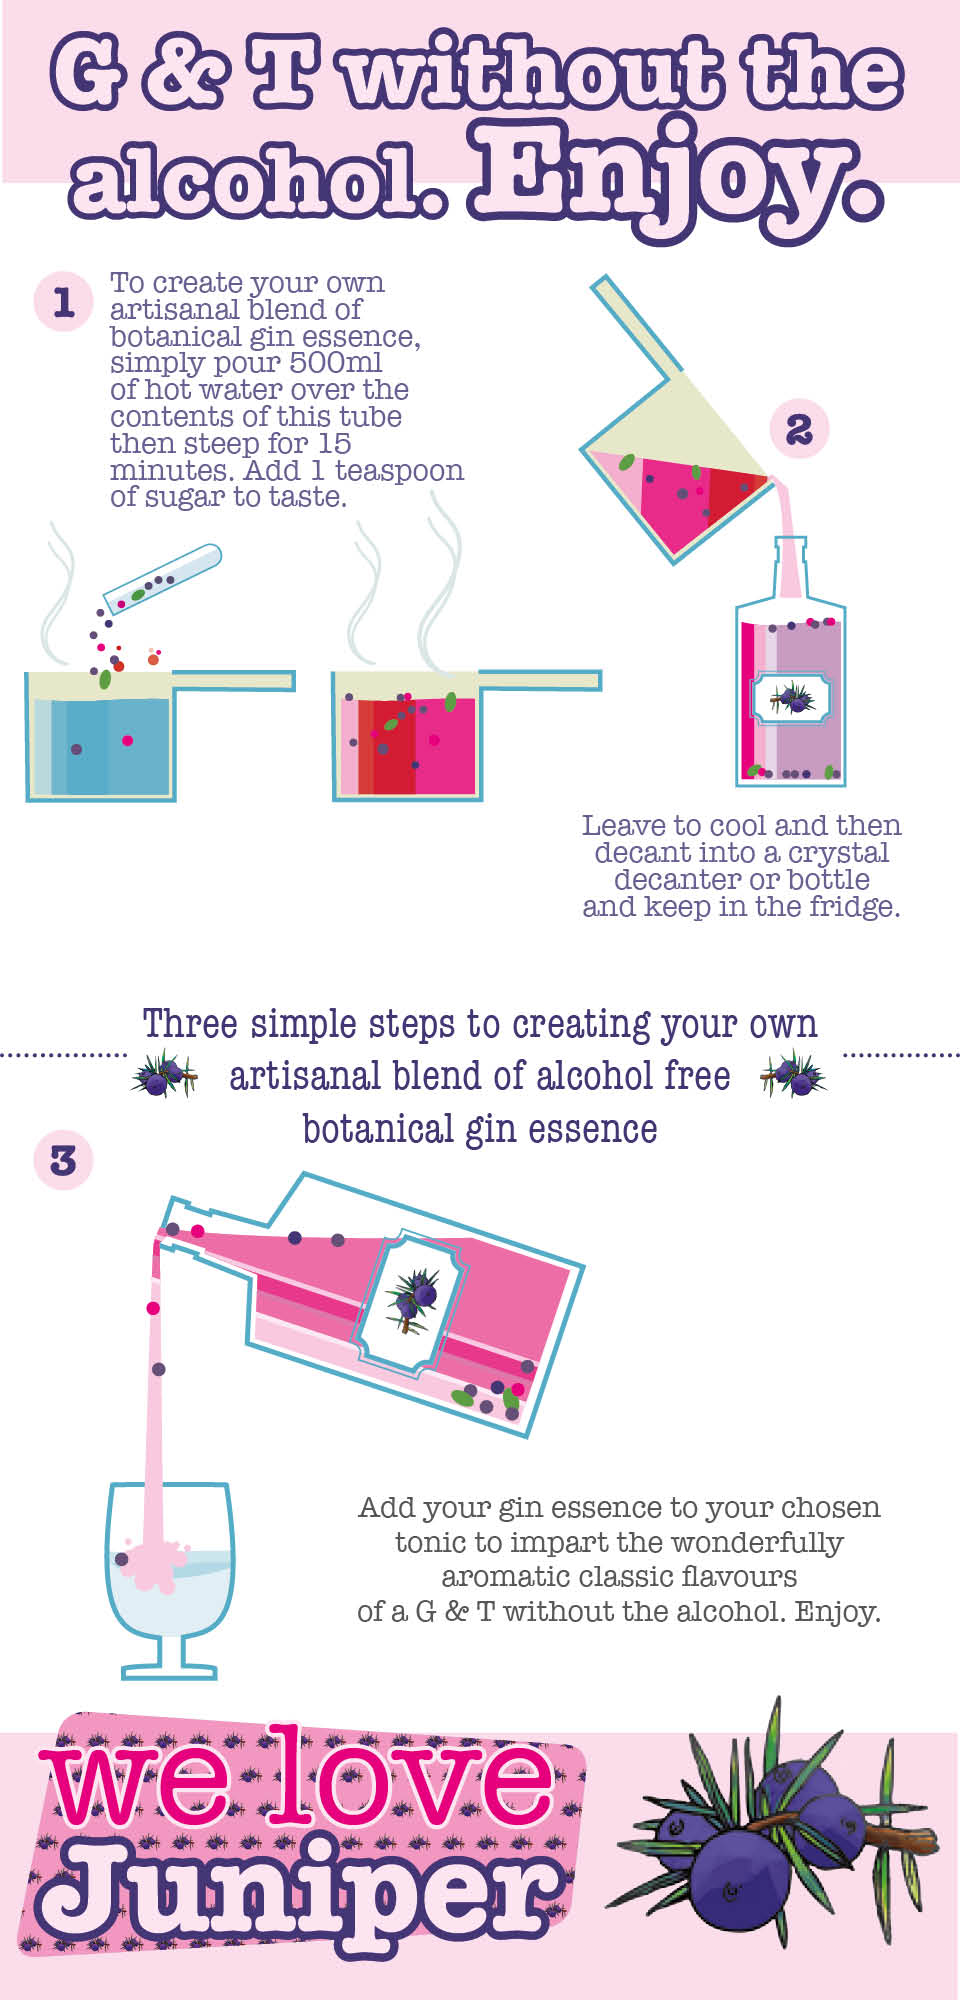 How to make alcohol free gin essence.